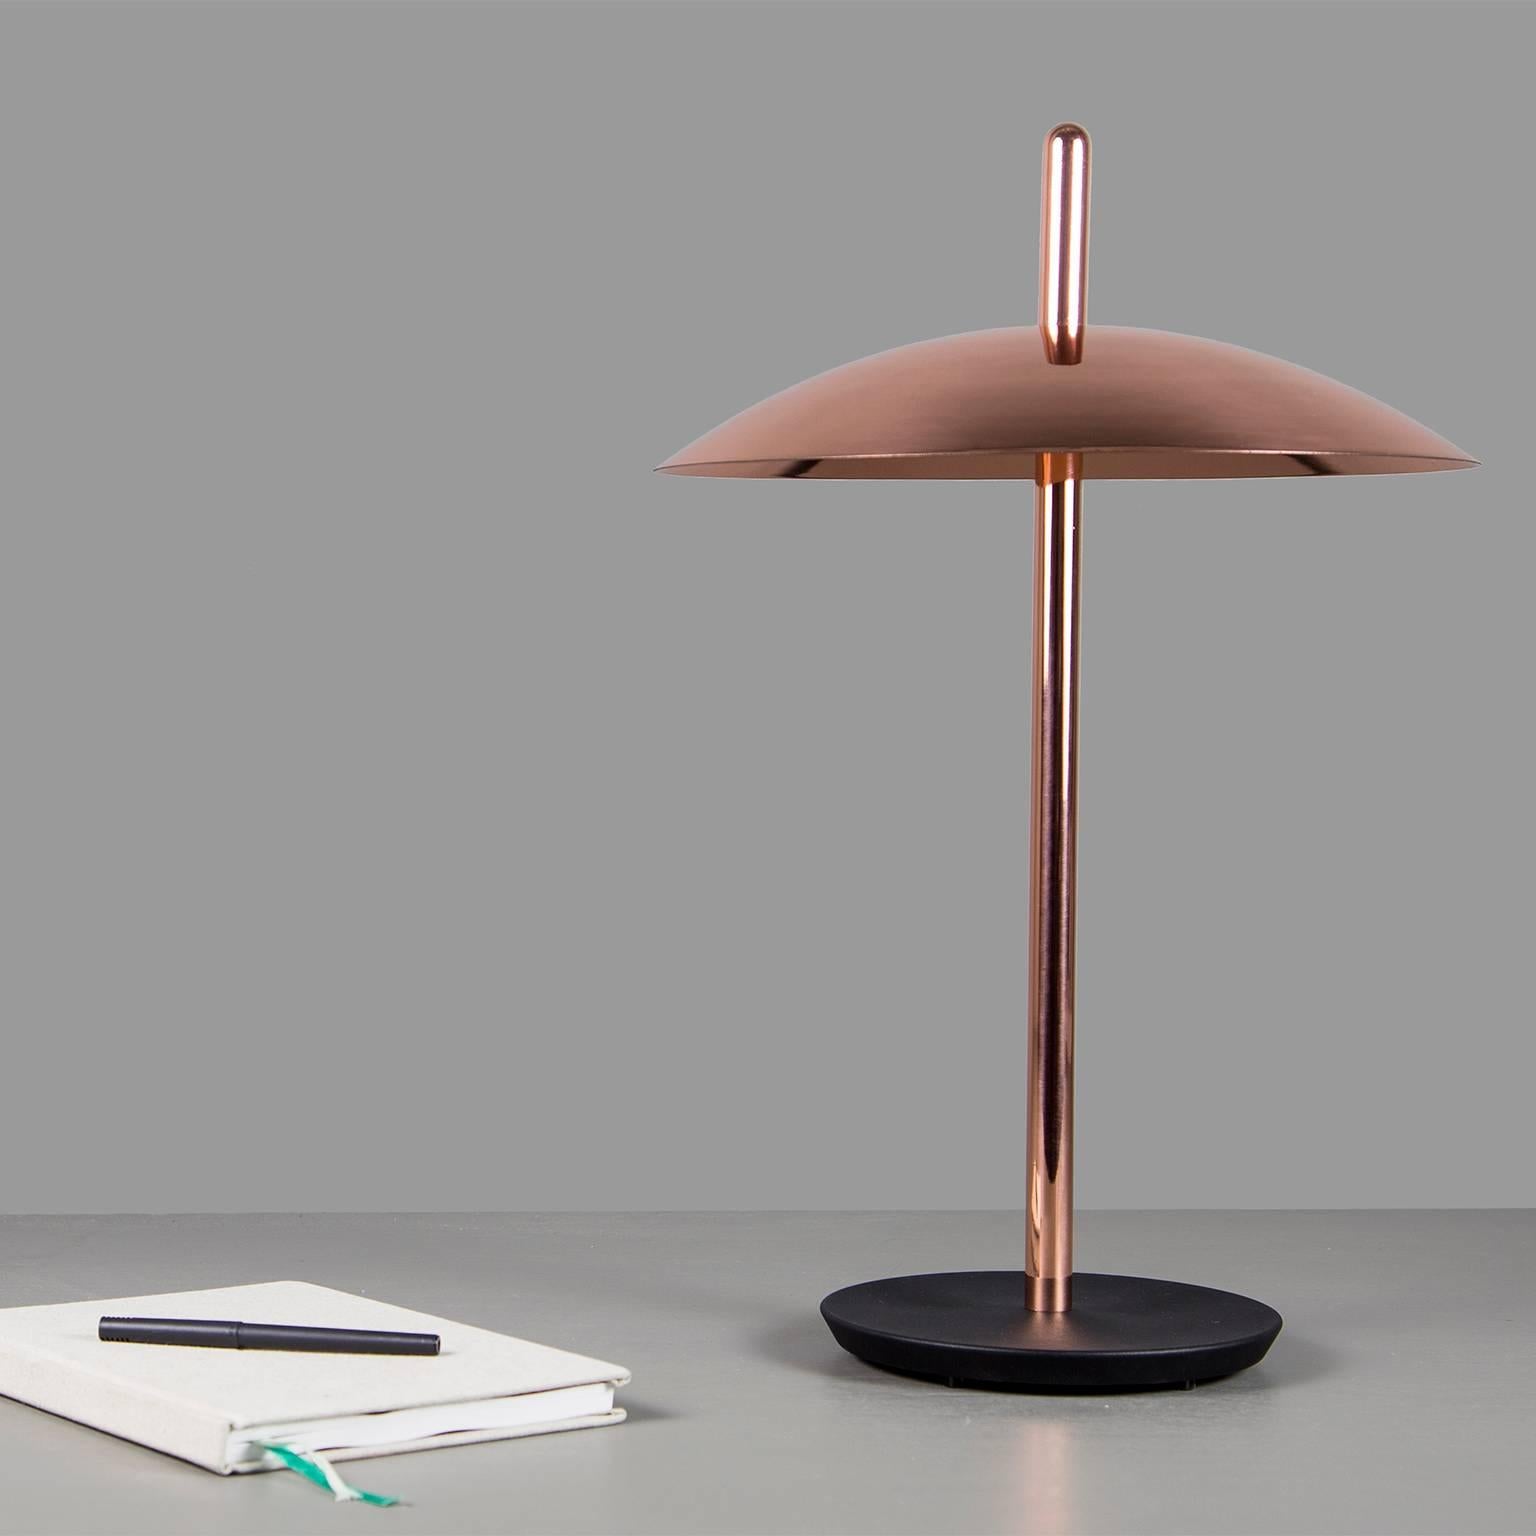 The signal table lamp is familiar, yet futuristic. From beneath it’s spun metal shade LEDs cast a warm and inviting glow onto a polished central stem grounded by a cast iron base. With it’s refined form and multiple finish options the signal table